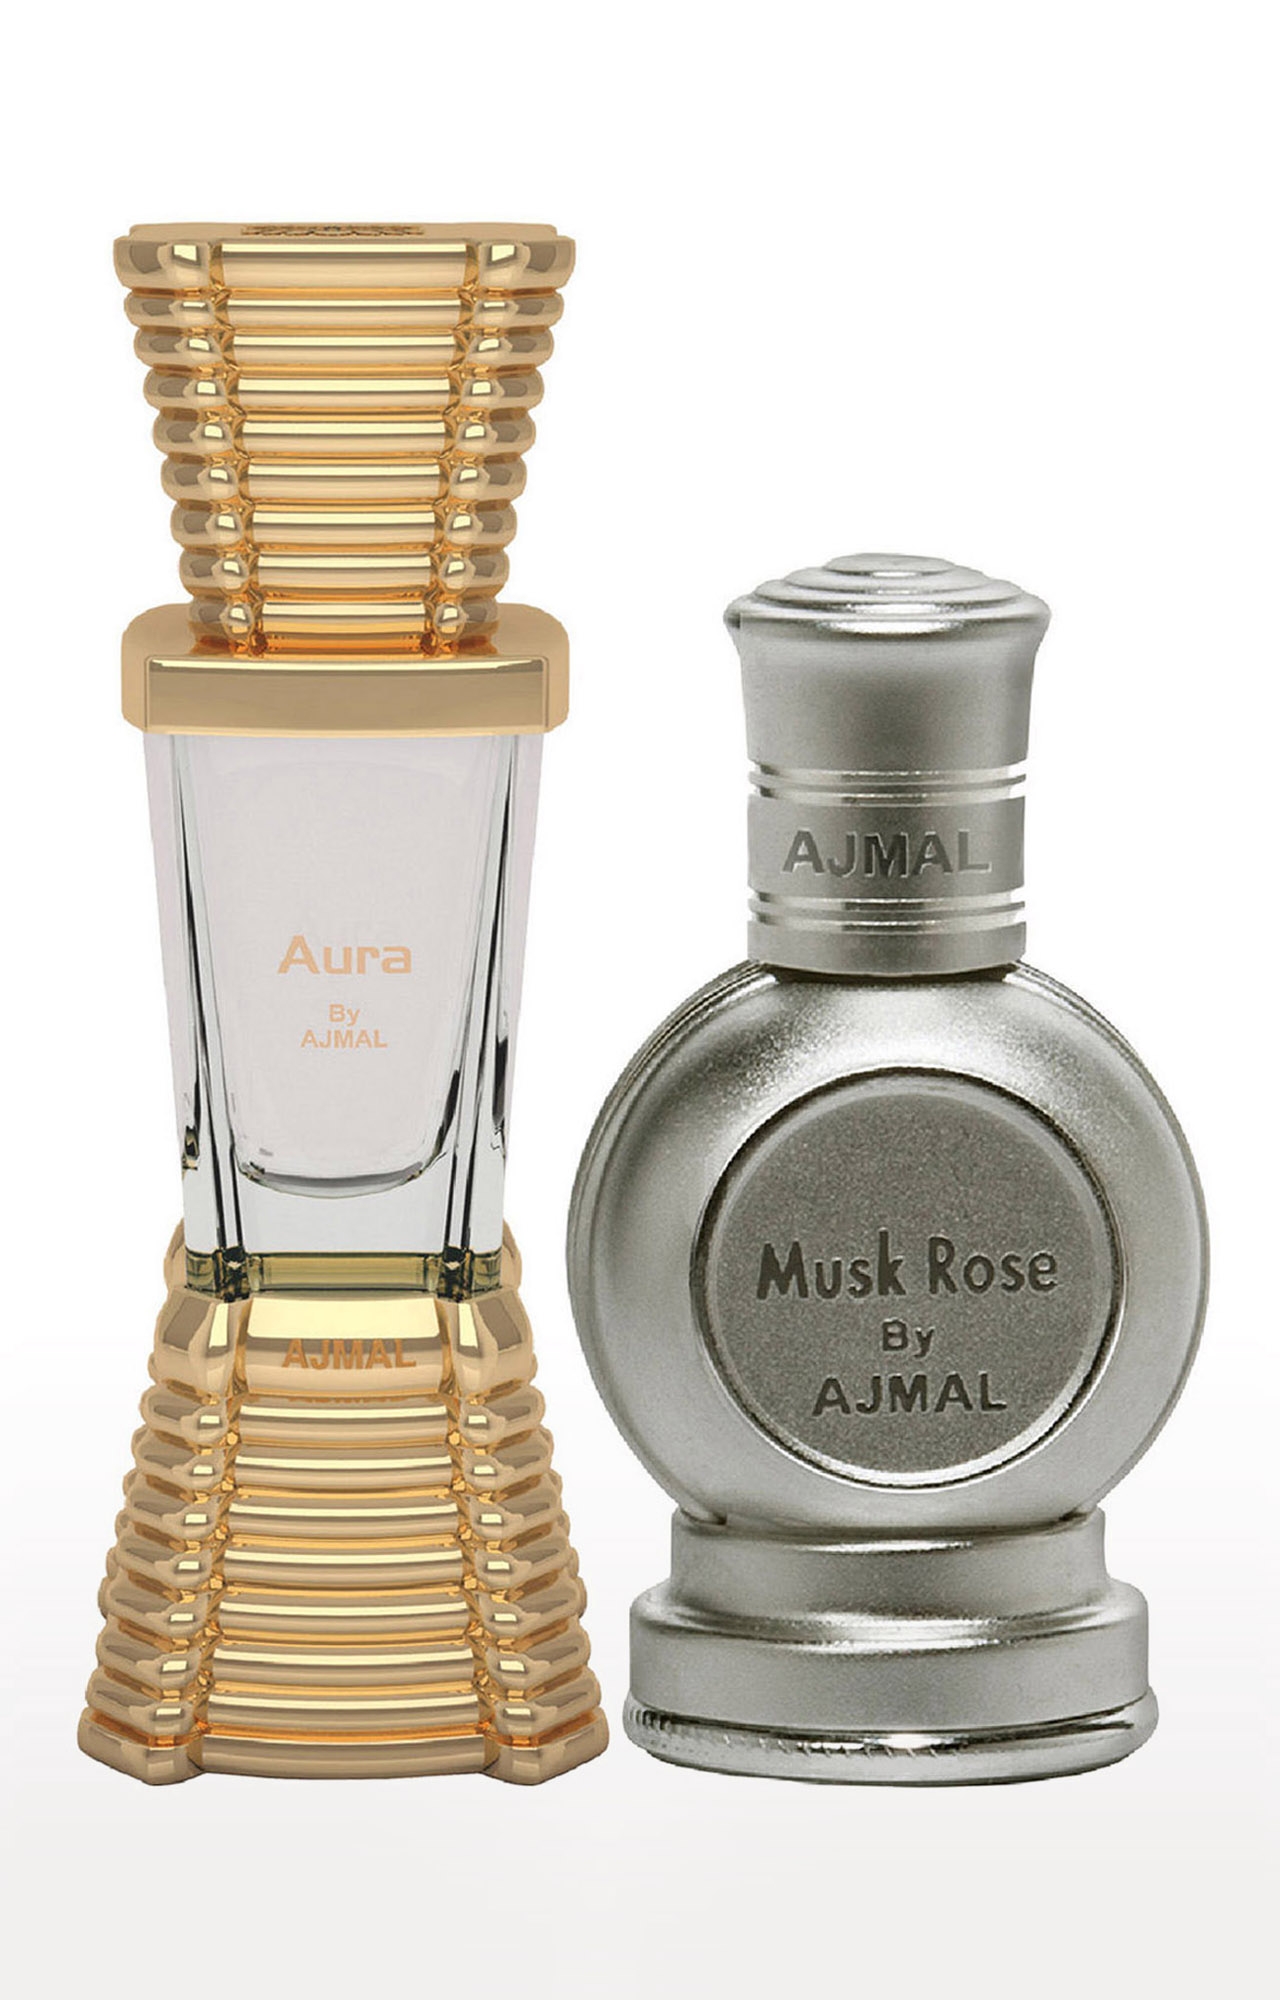 Ajmal | Ajmal Aura Concentrated Perfume Oil Floral Fruity Alcohol- Attar 10Ml For Unisex And Musk Rose Concentrated Perfume Oil Floral Musky Alcohol- Attar 12Ml For Unisex